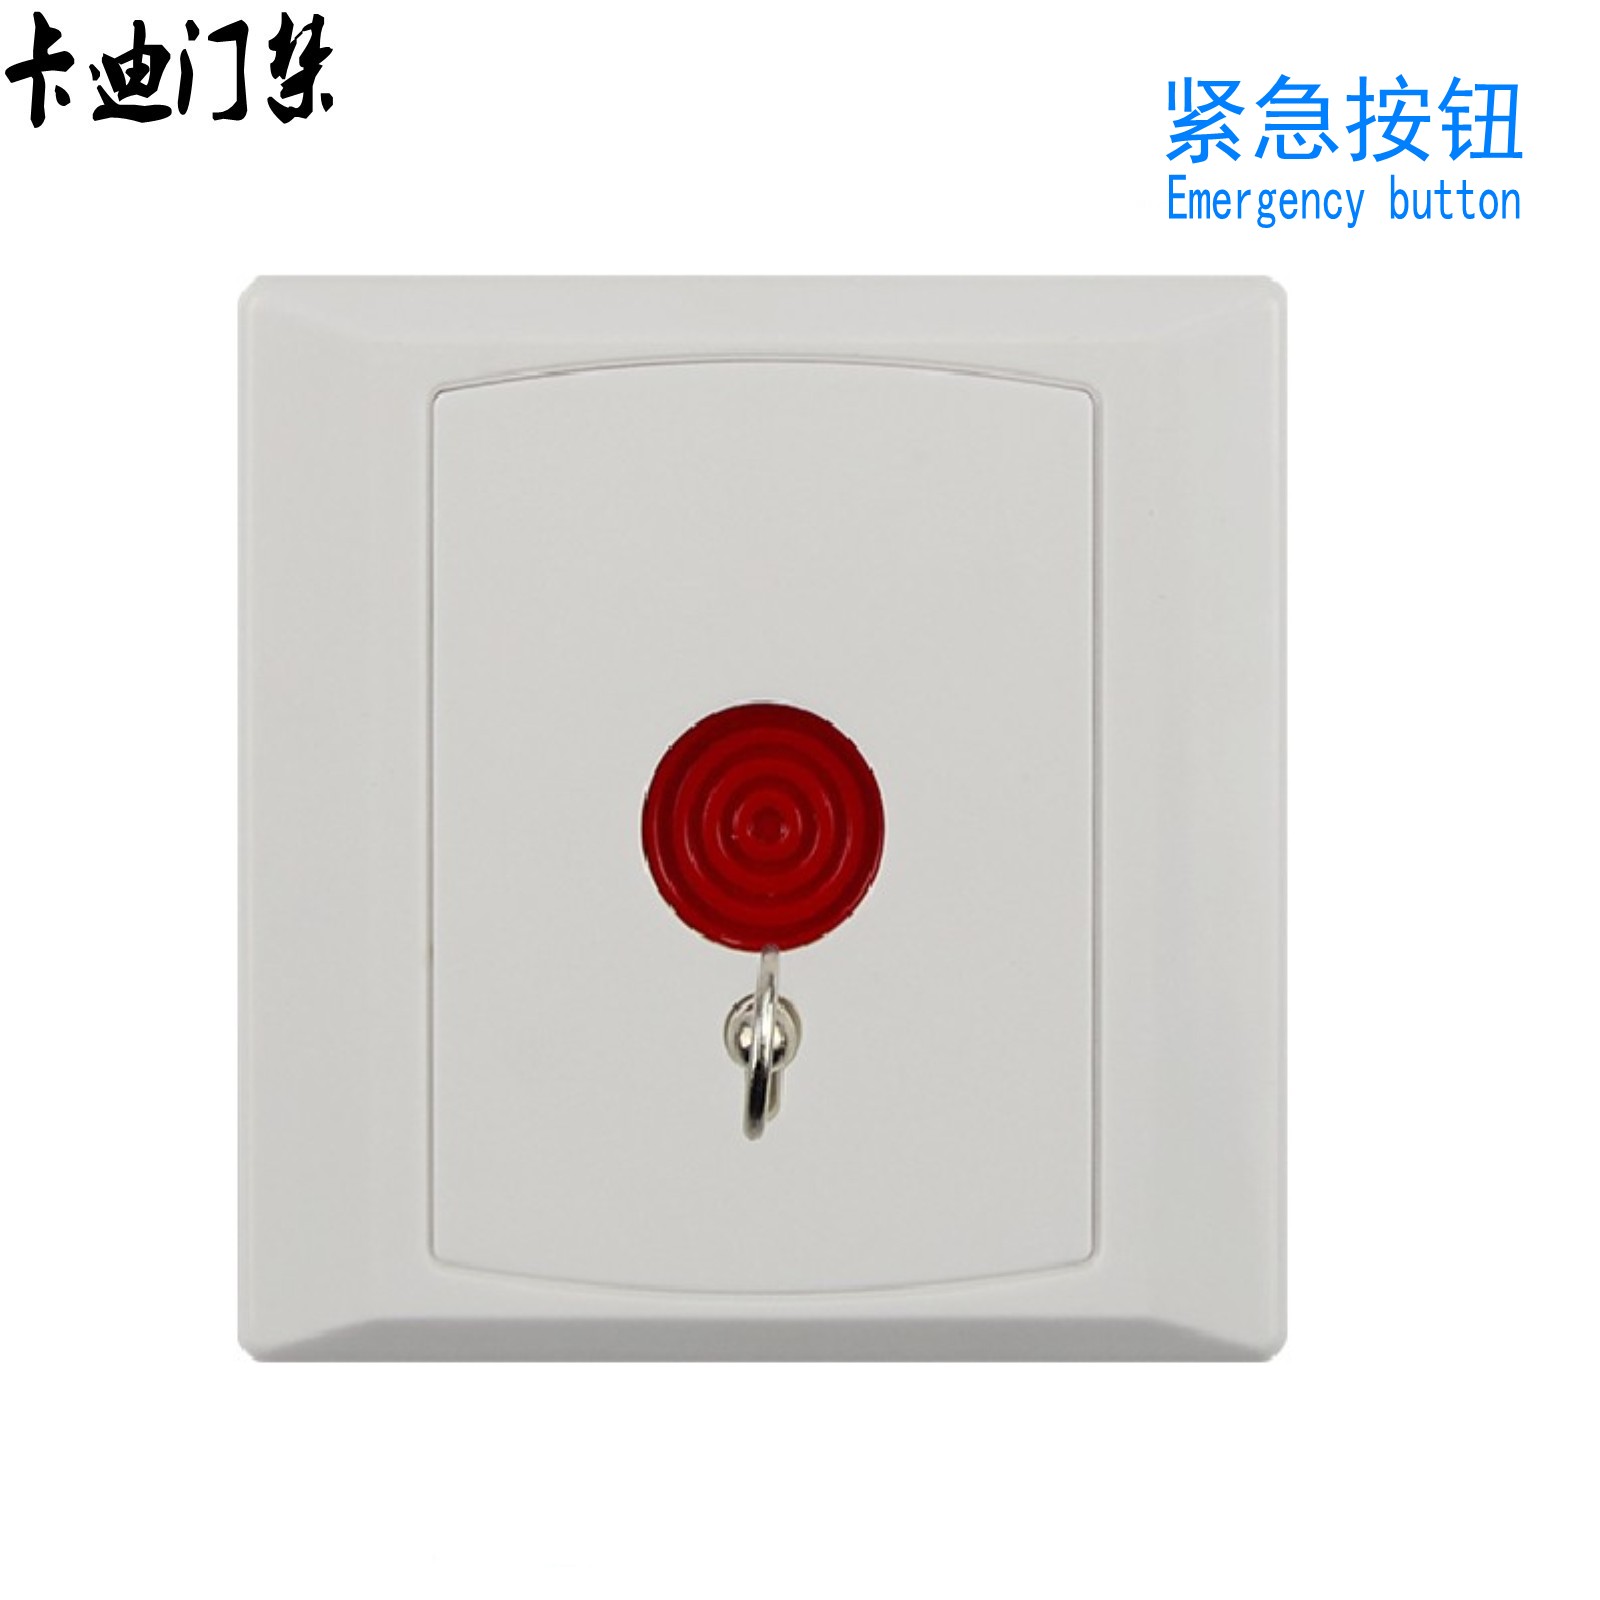 Key Emergency alarm switch Dressing room for disabled persons Fire bank distress call Corridor Normally open and close button